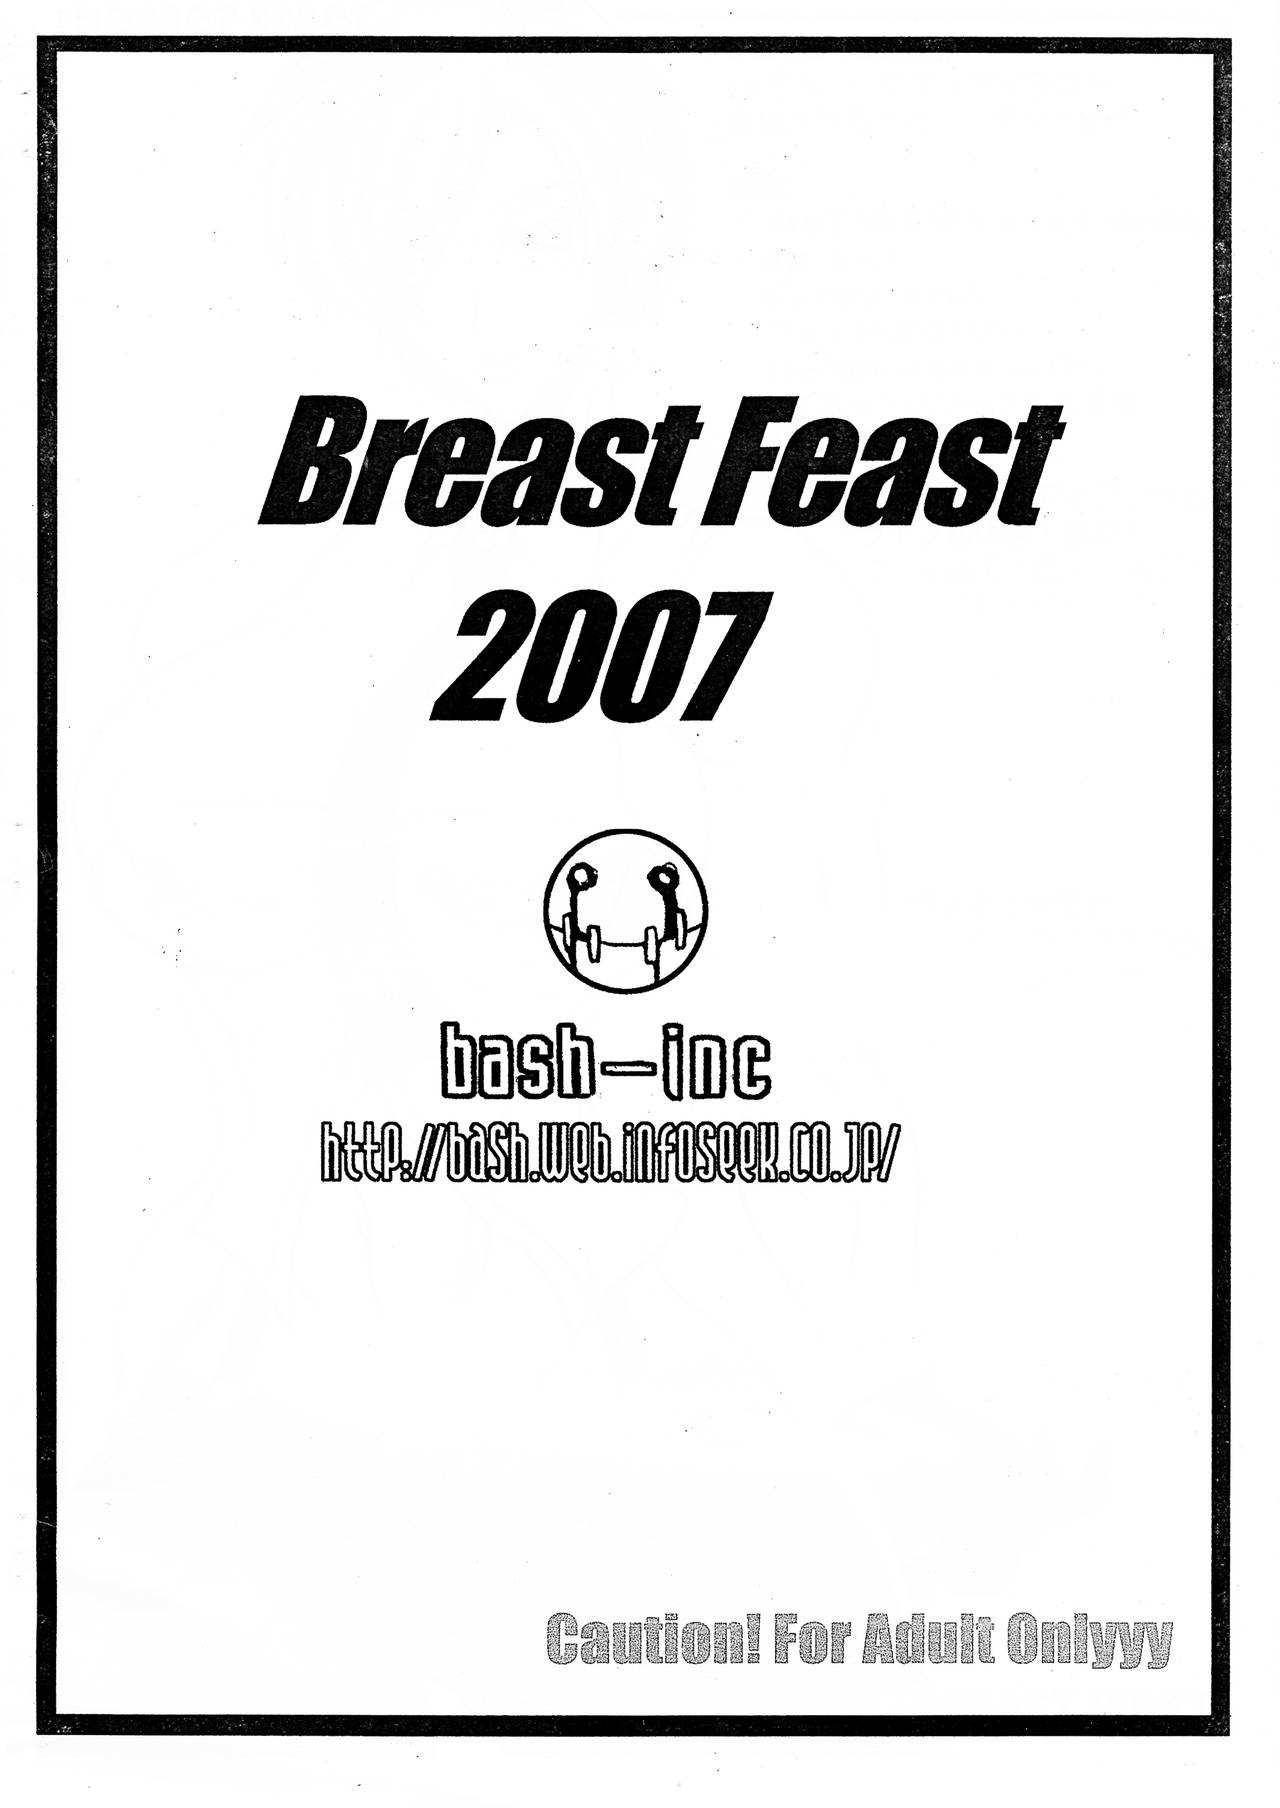 (SC34) [bash-inc (BASH)] Breast Feast 2007 (Various) page 2 full